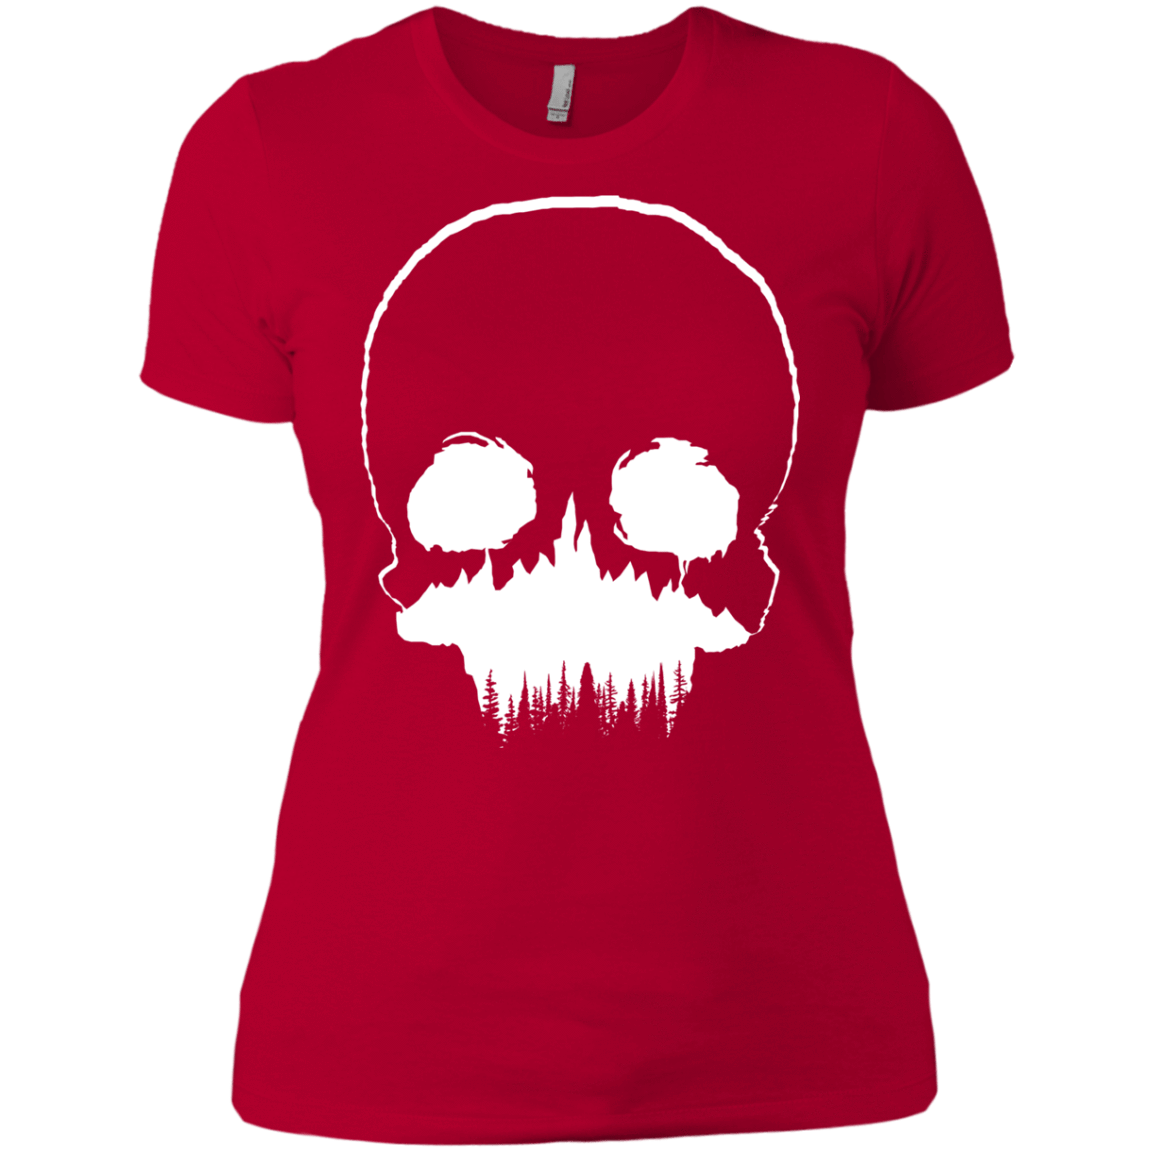 T-Shirts Red / X-Small Skull Forest Women's Premium T-Shirt